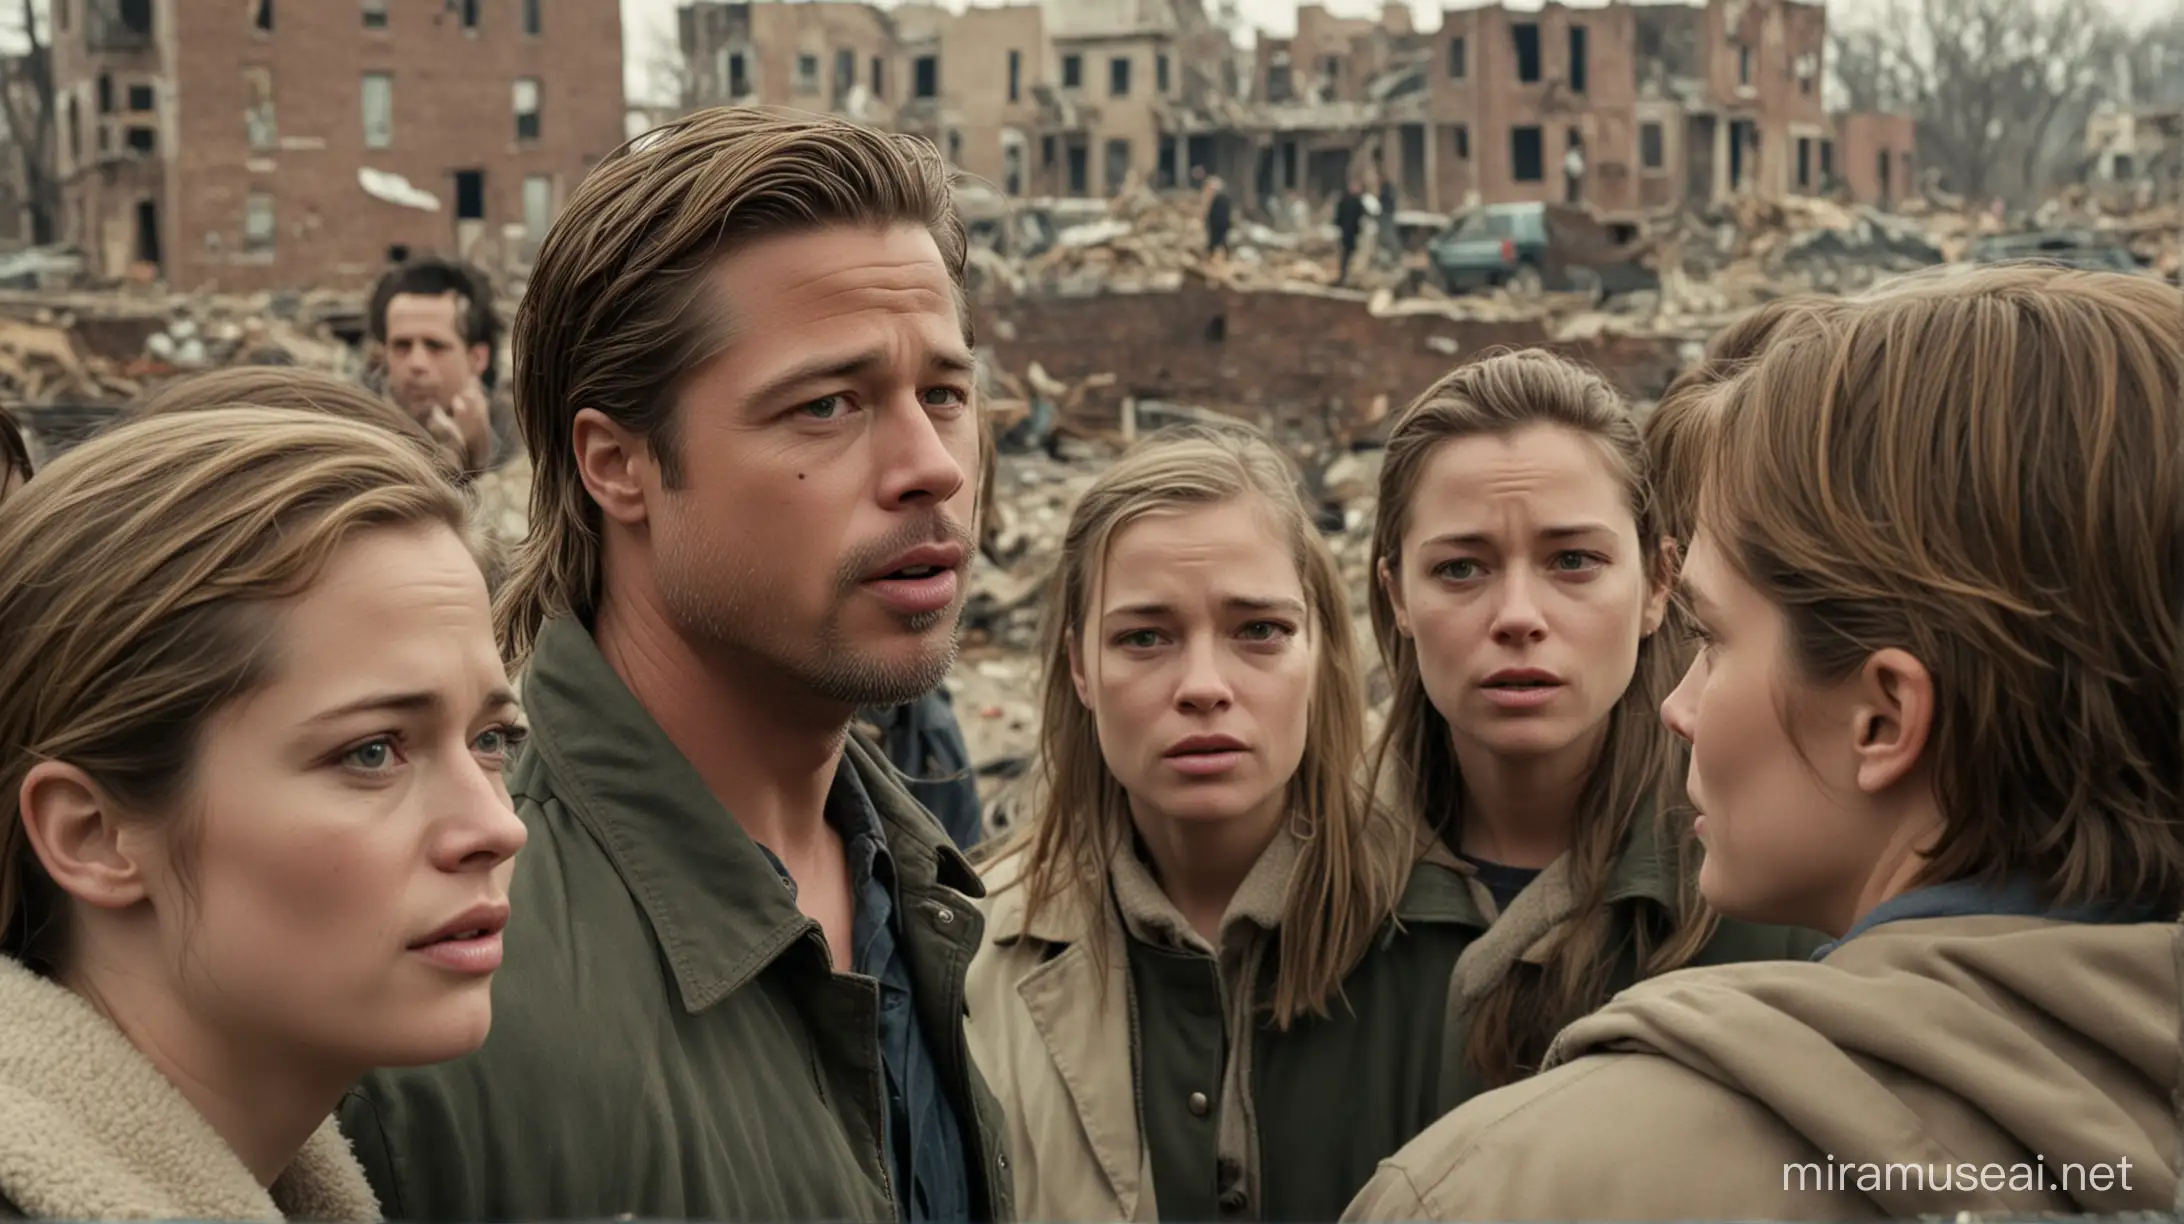 Brad Pitt confronts a group of survivors huddled in the ruins of a suburban neighborhood, desperation evident in their eyes.